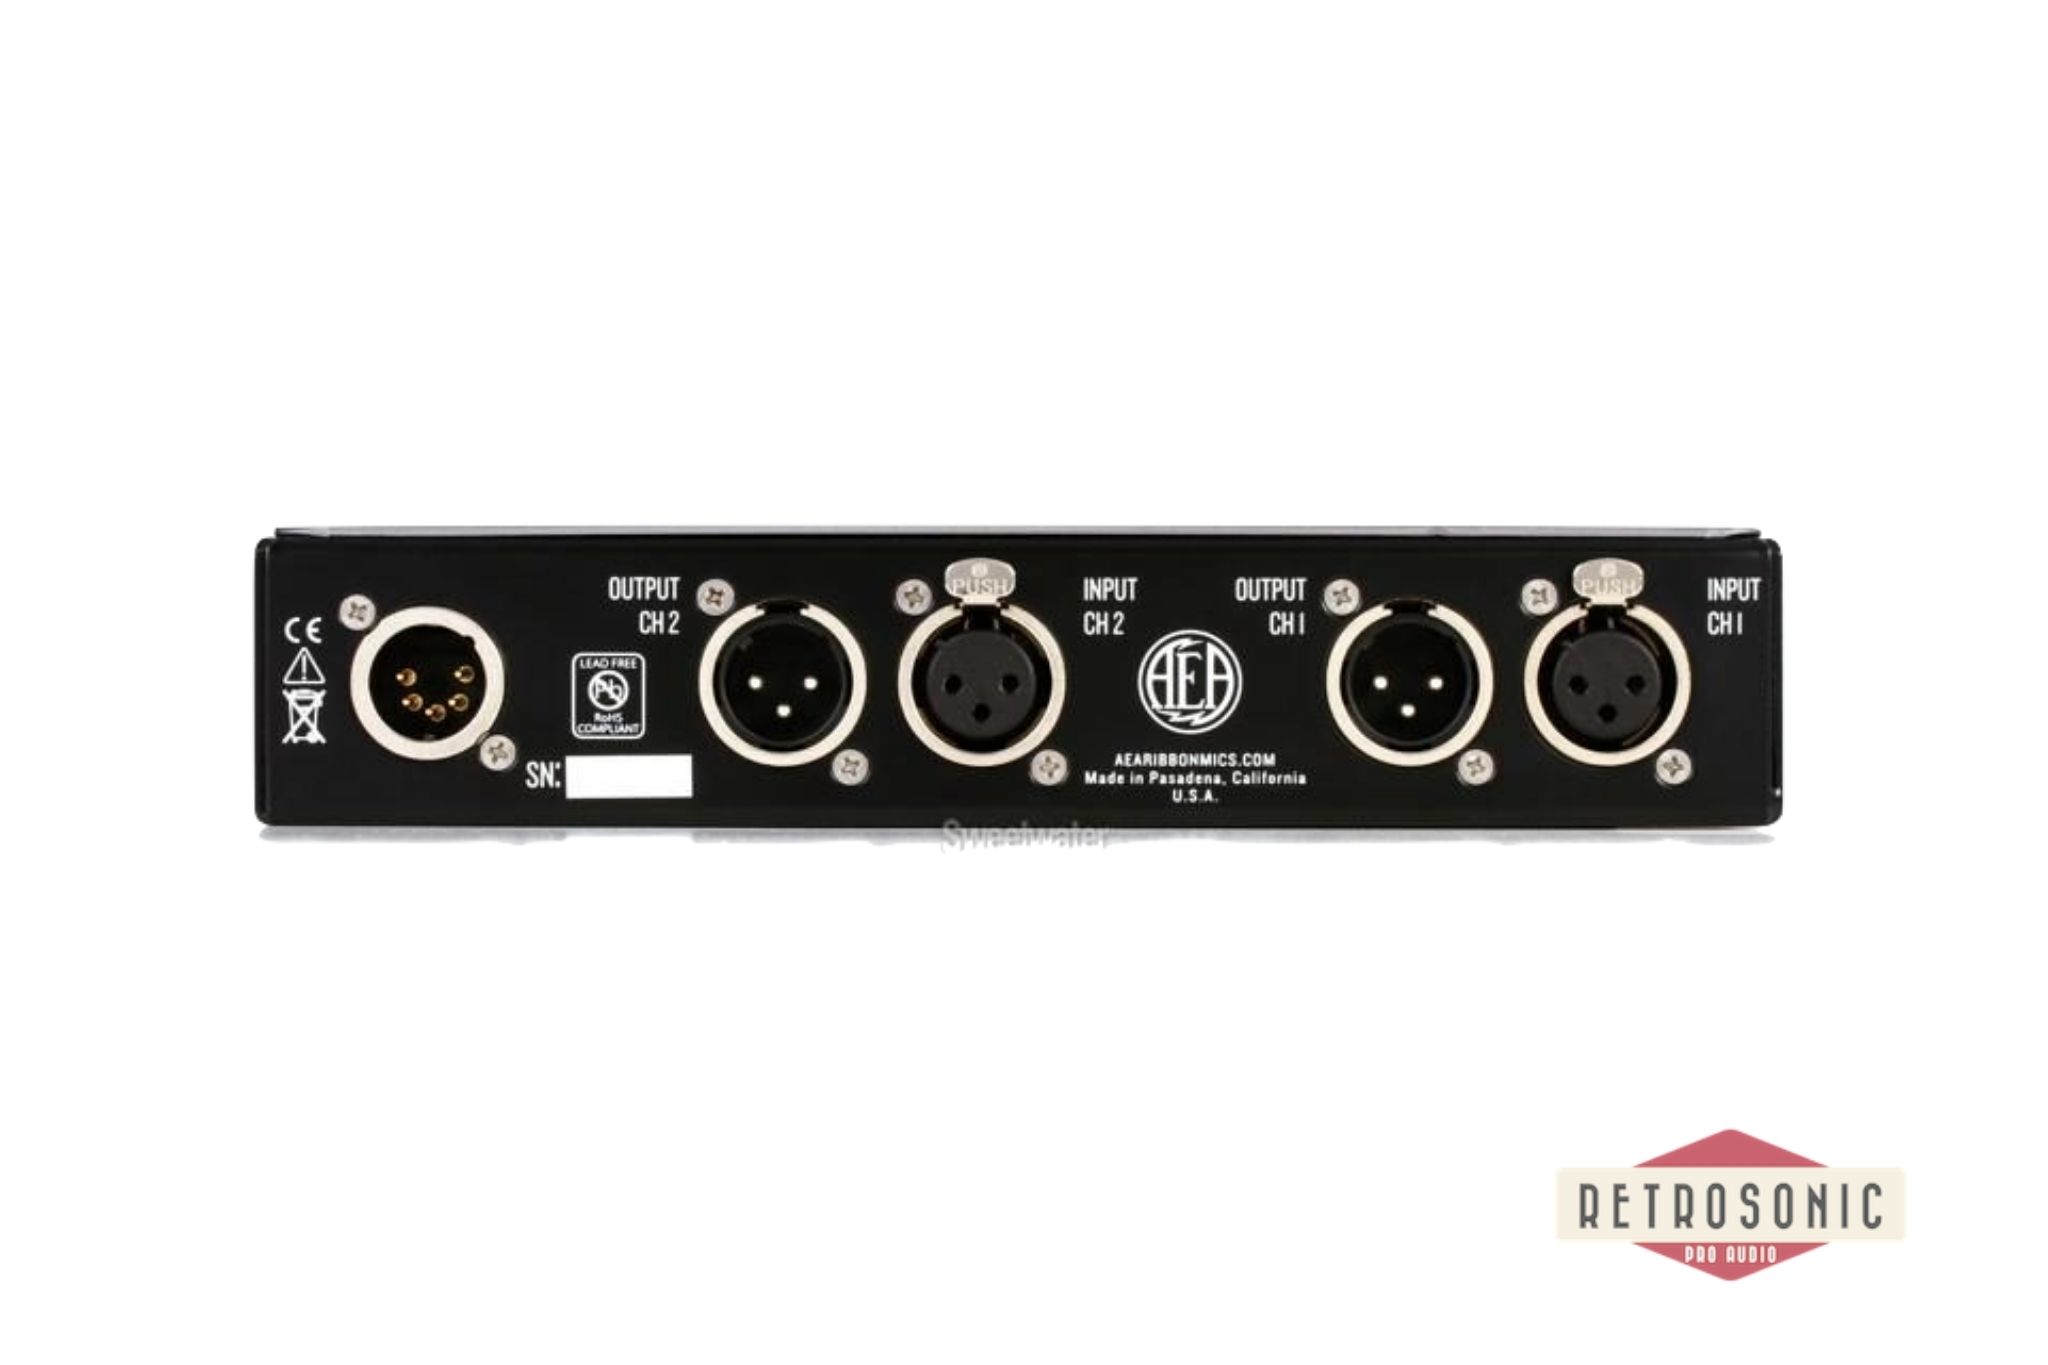 AEA TRP2 2-Channel Preamp P48